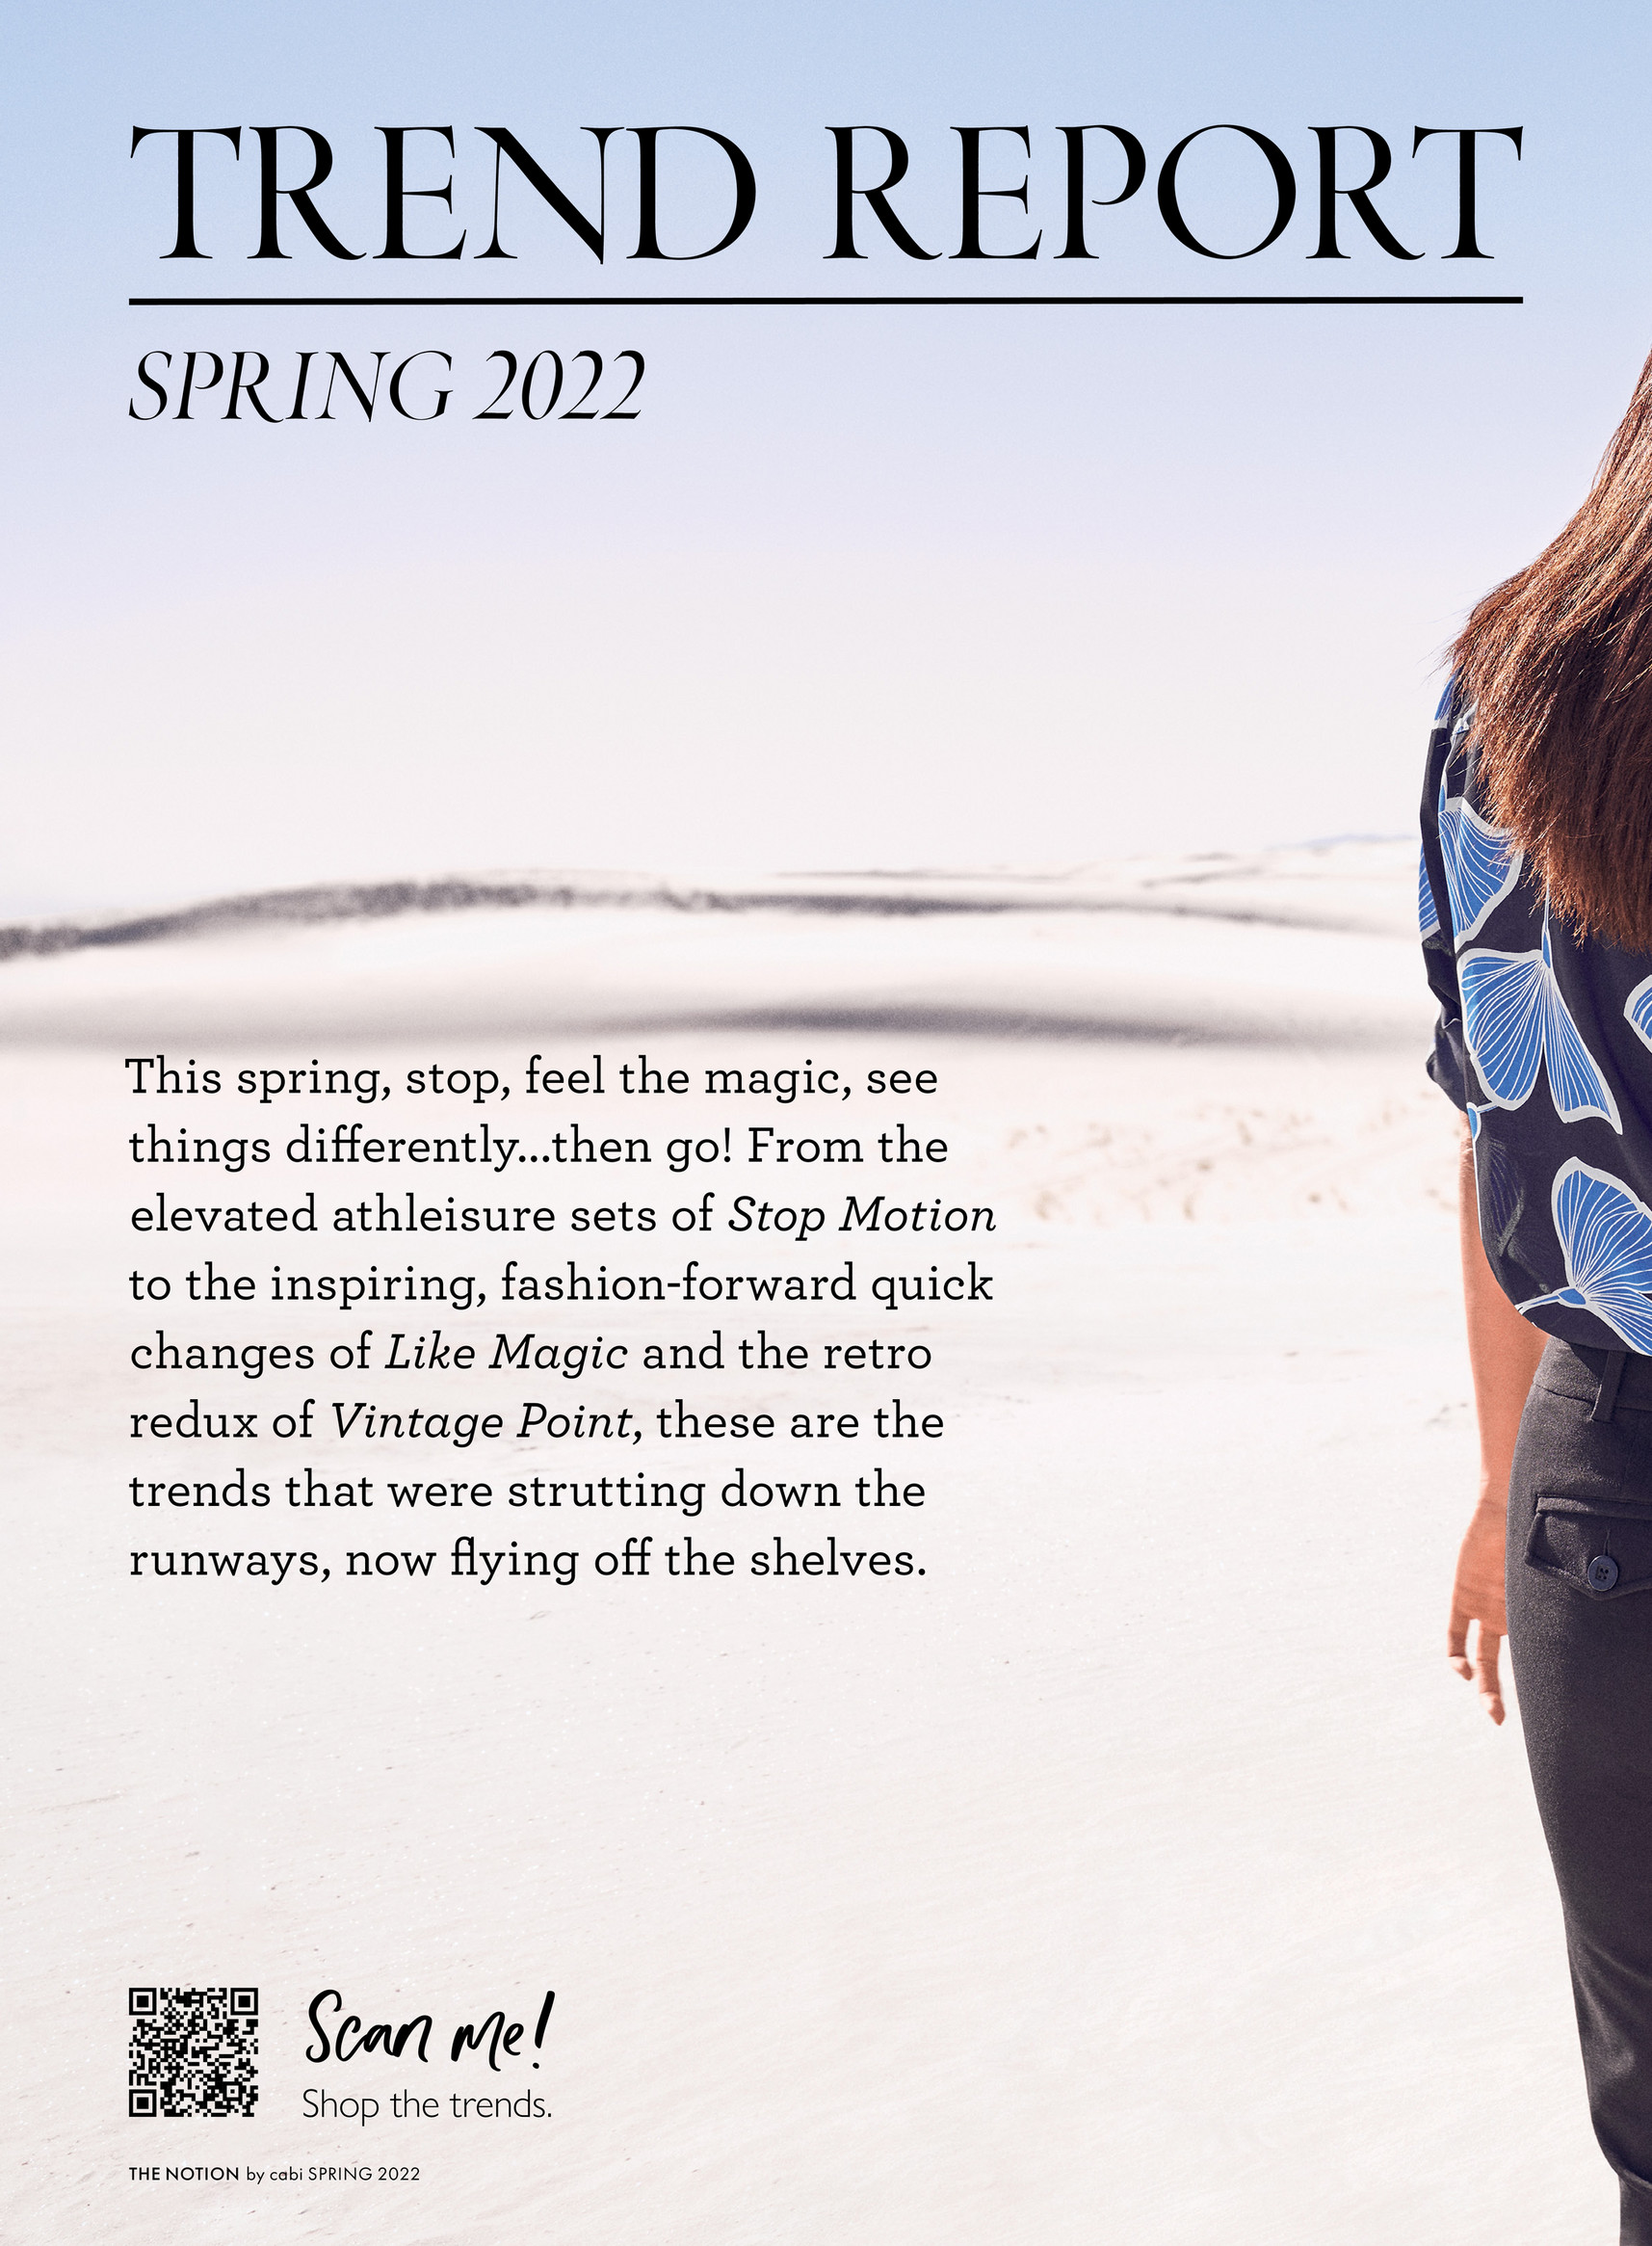 Cabi - Spring 2022 Notion - Page 28-29